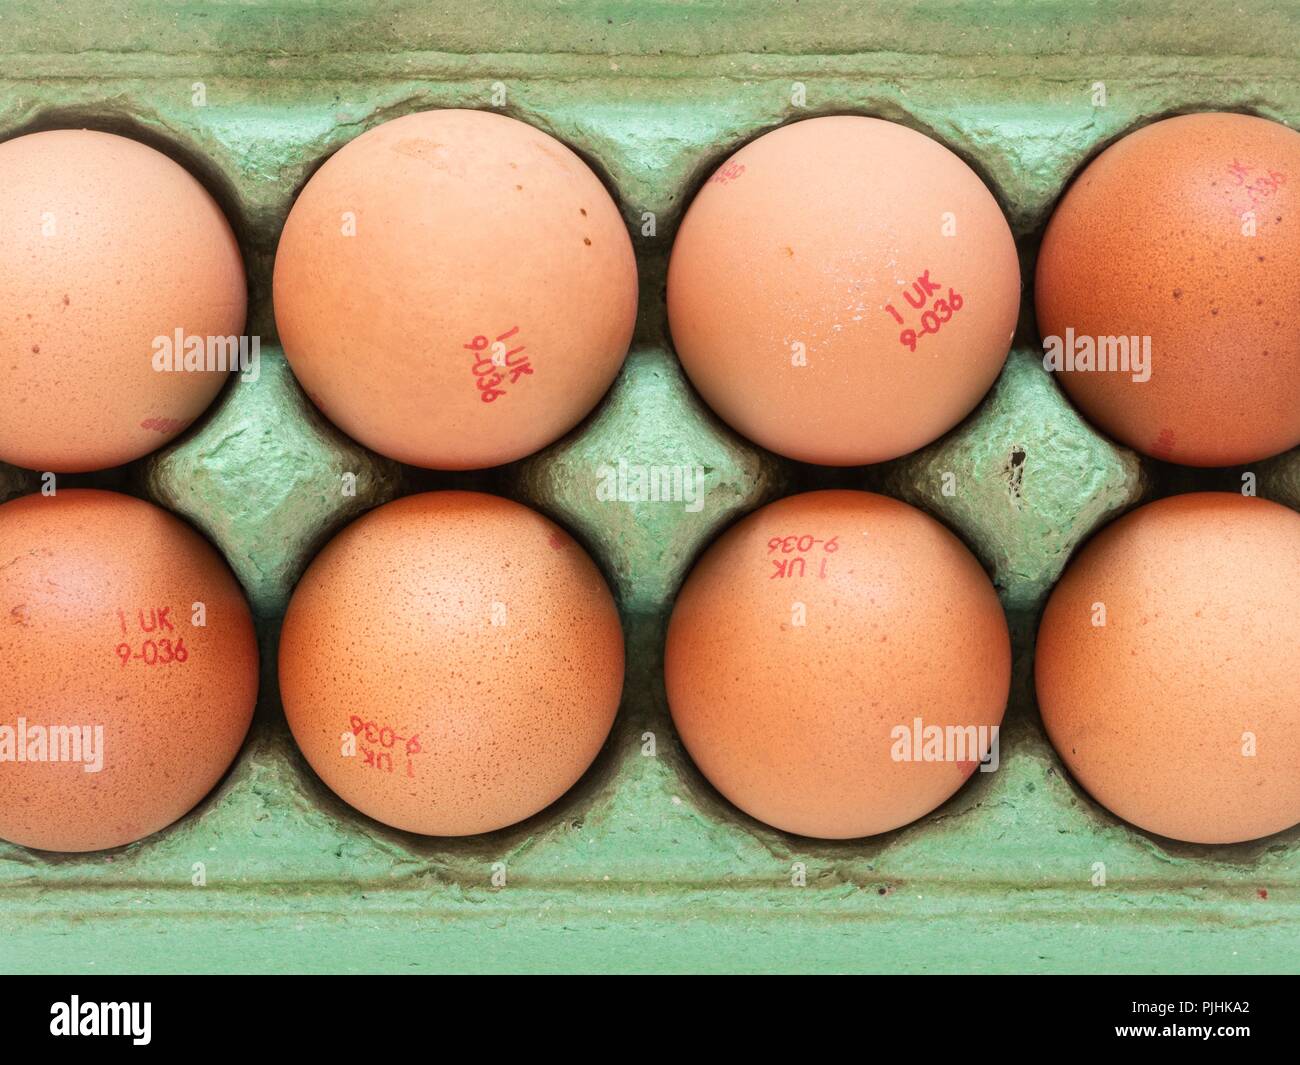 Looking down onto a green egg carton filled with eight hens' eggs Stock Photo